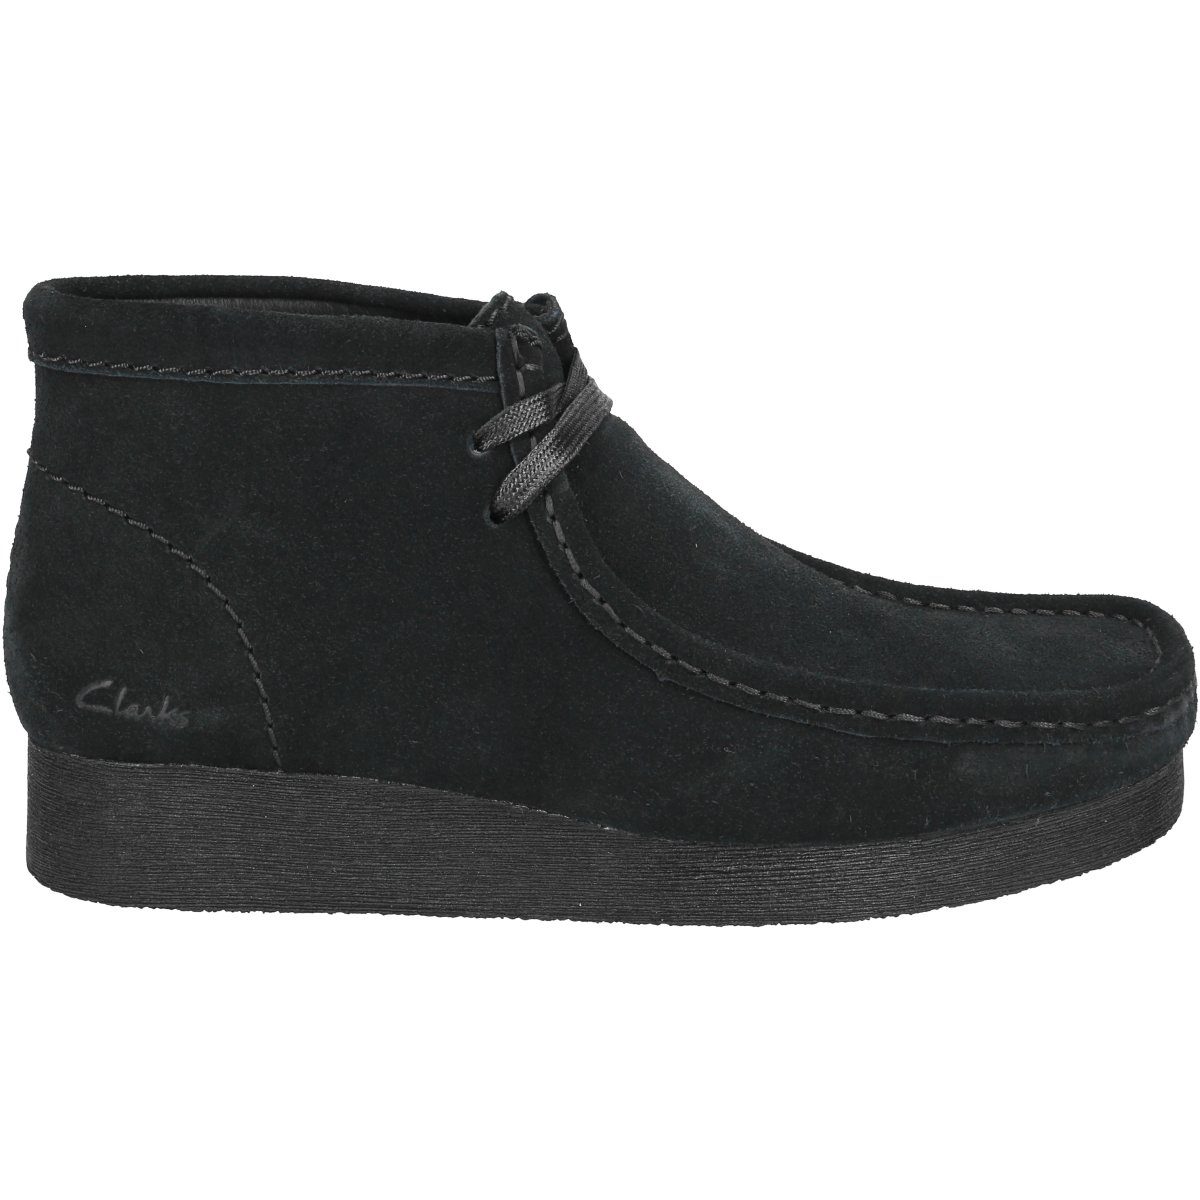 Boot Stiefel 2 26161529 Wallabee Clarks 4